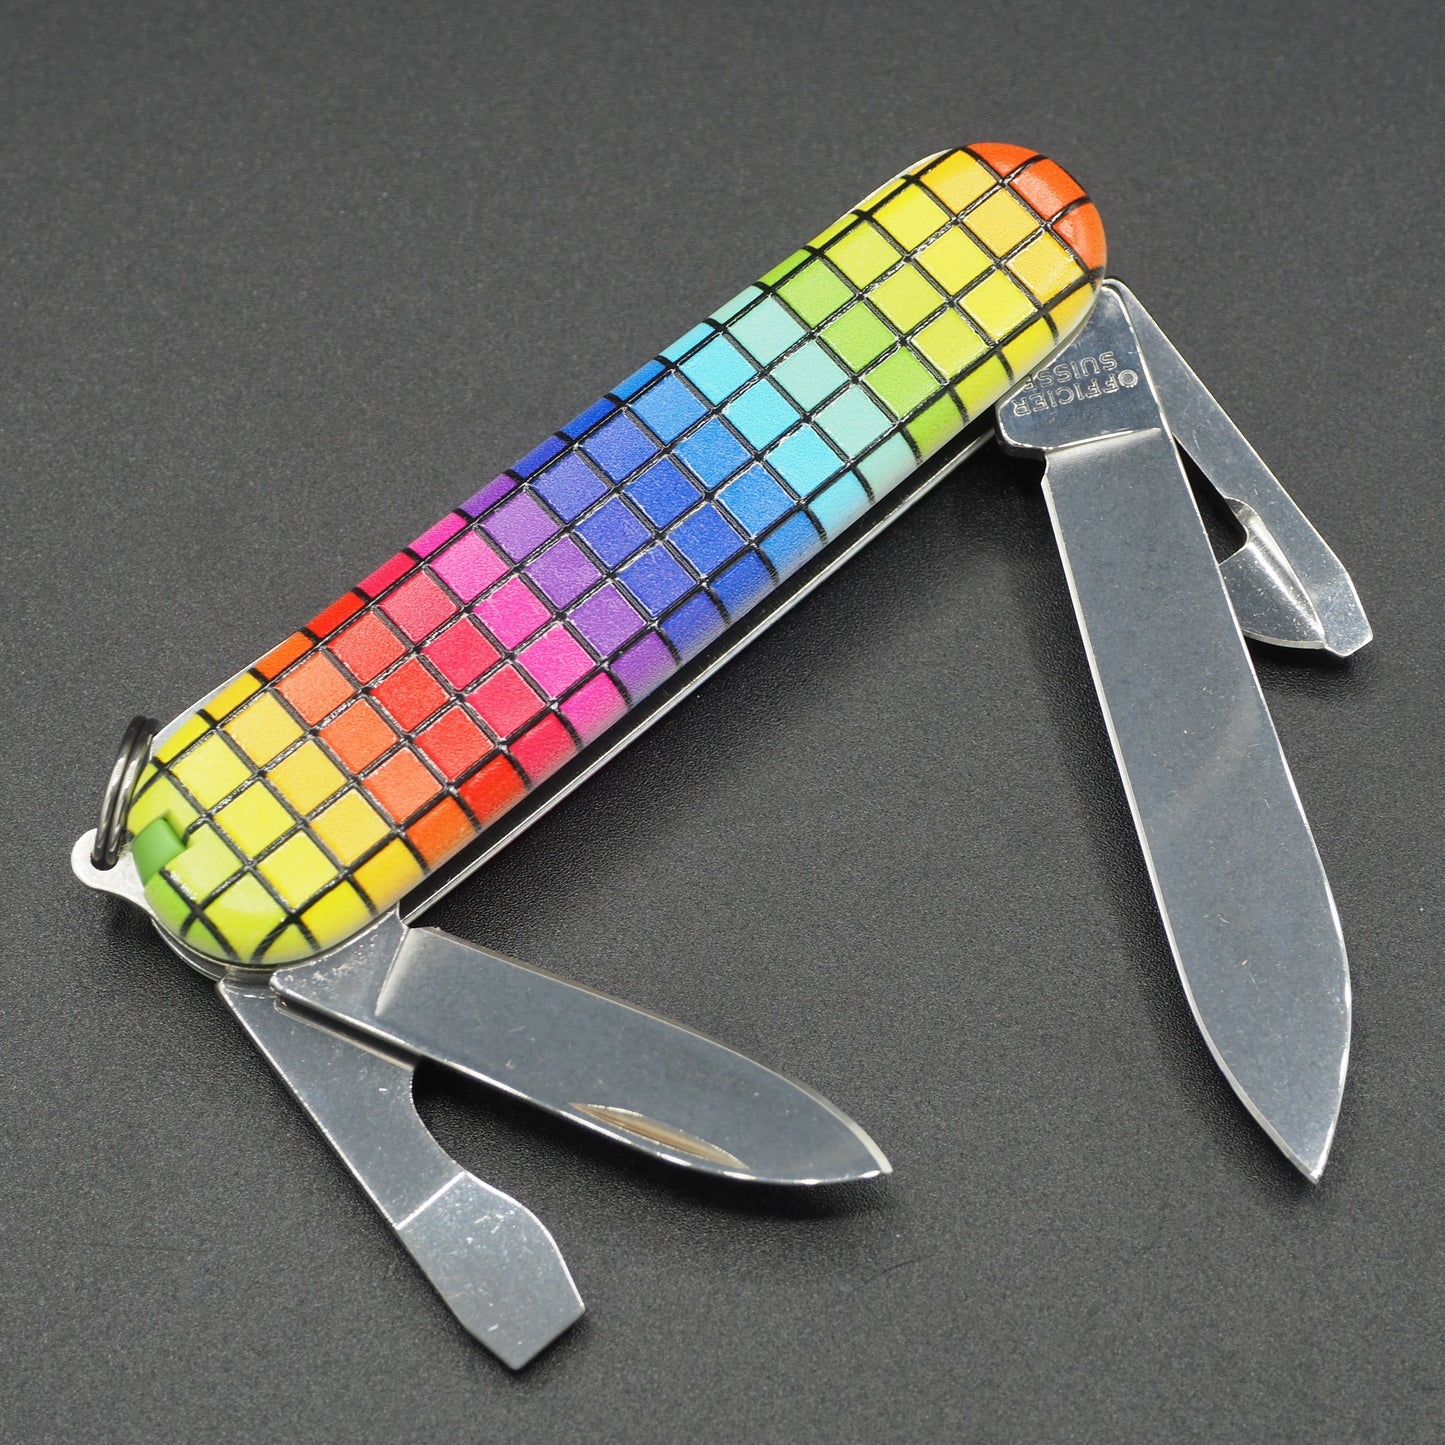 Victorinox Recruit 84mm "The Color" 3D The Sharp Knife Club Edition